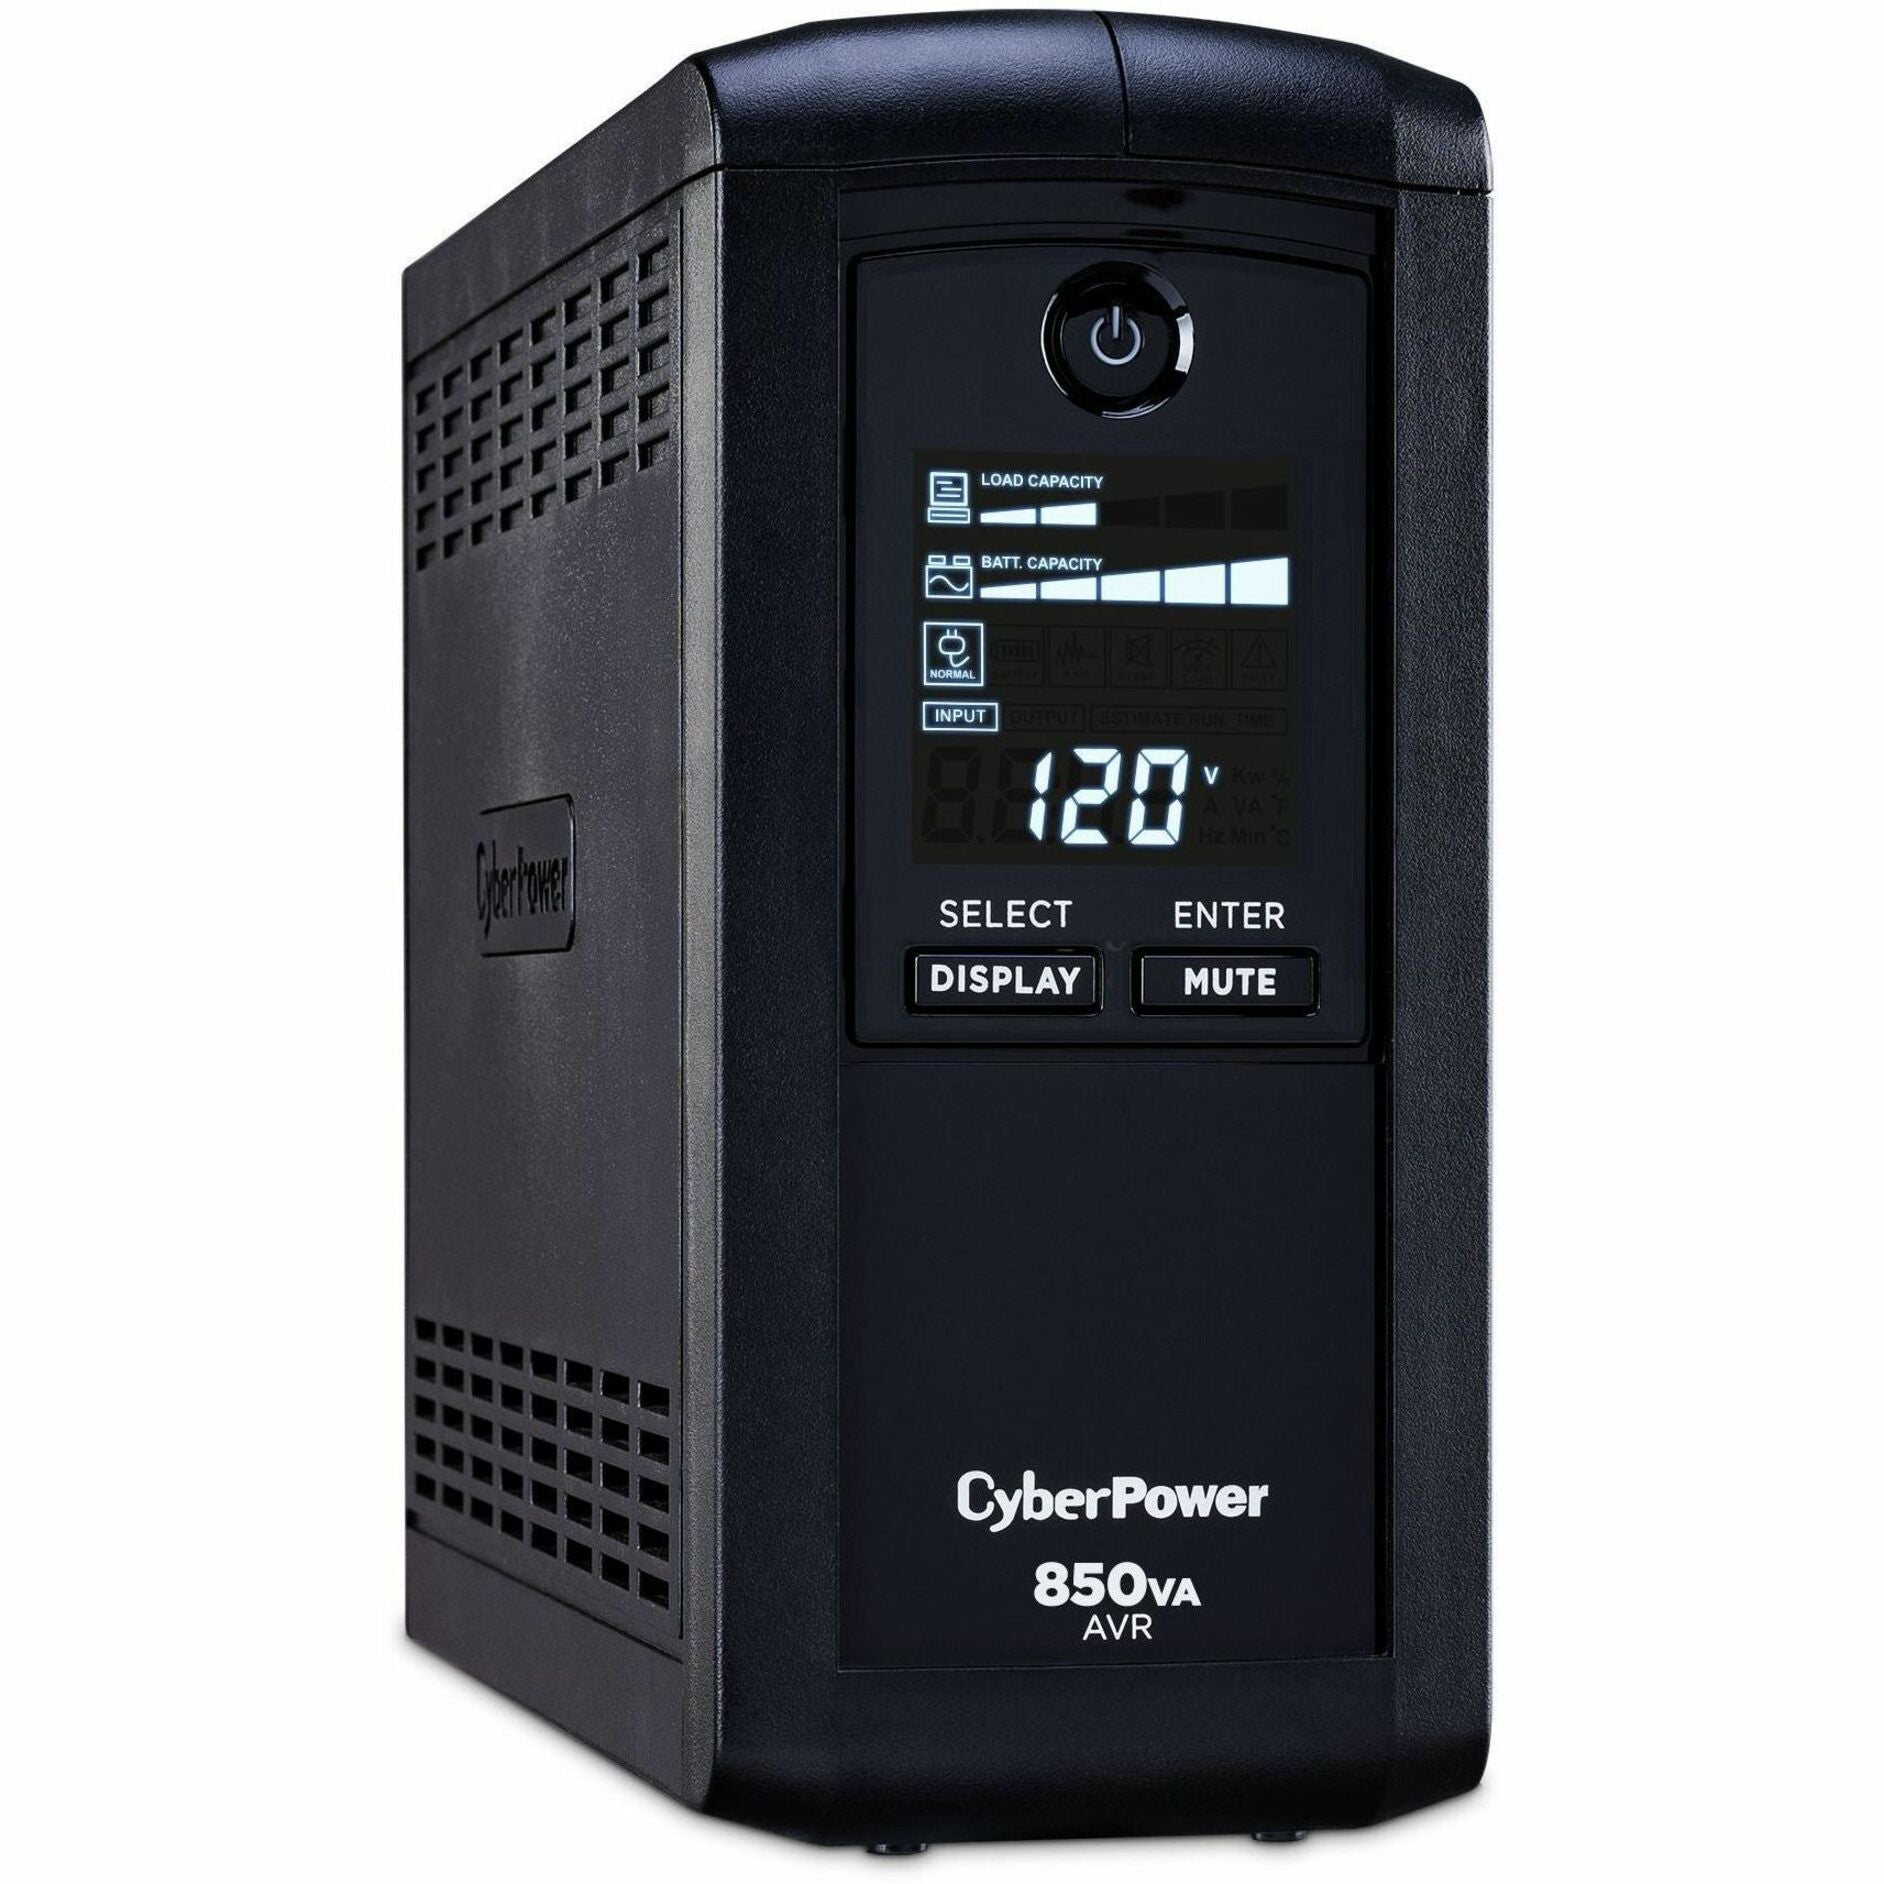 CyberPower CP850AVRLCD Intelligent LCD UPS Systems, 850 VA Tower UPS, 3 Year Warranty, Energy Star, USB and Serial Port